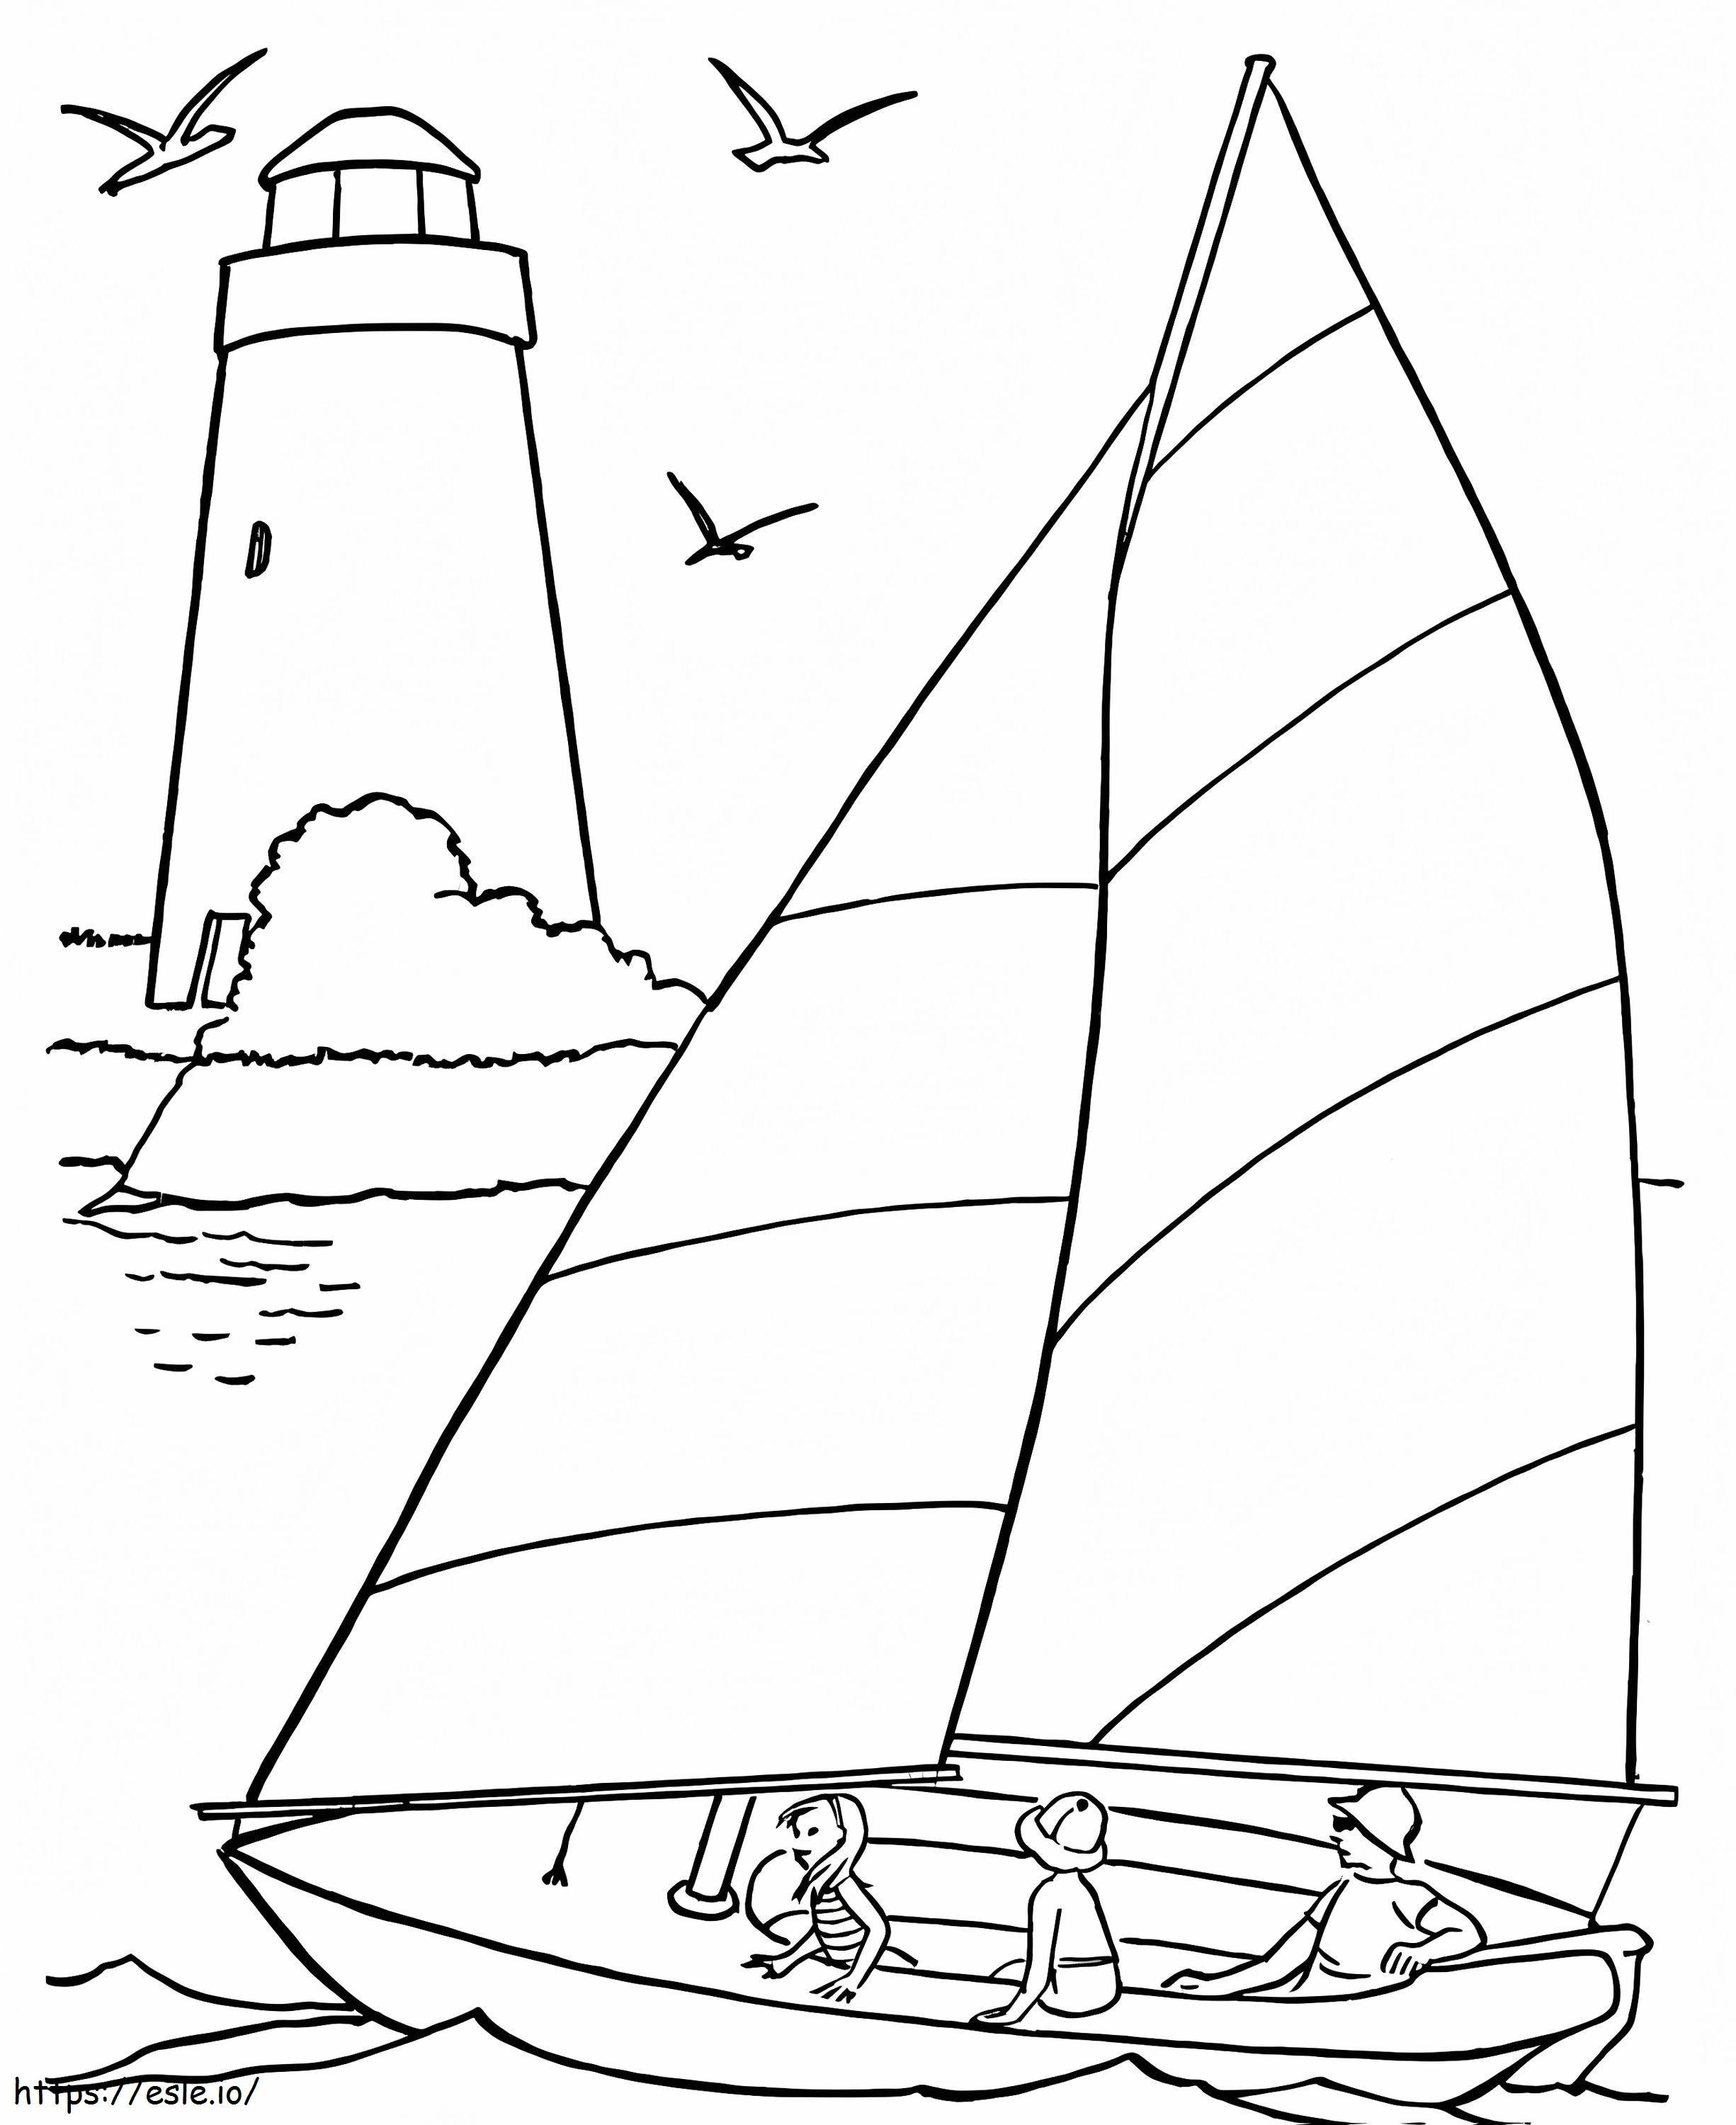 Family On Sailboat coloring page